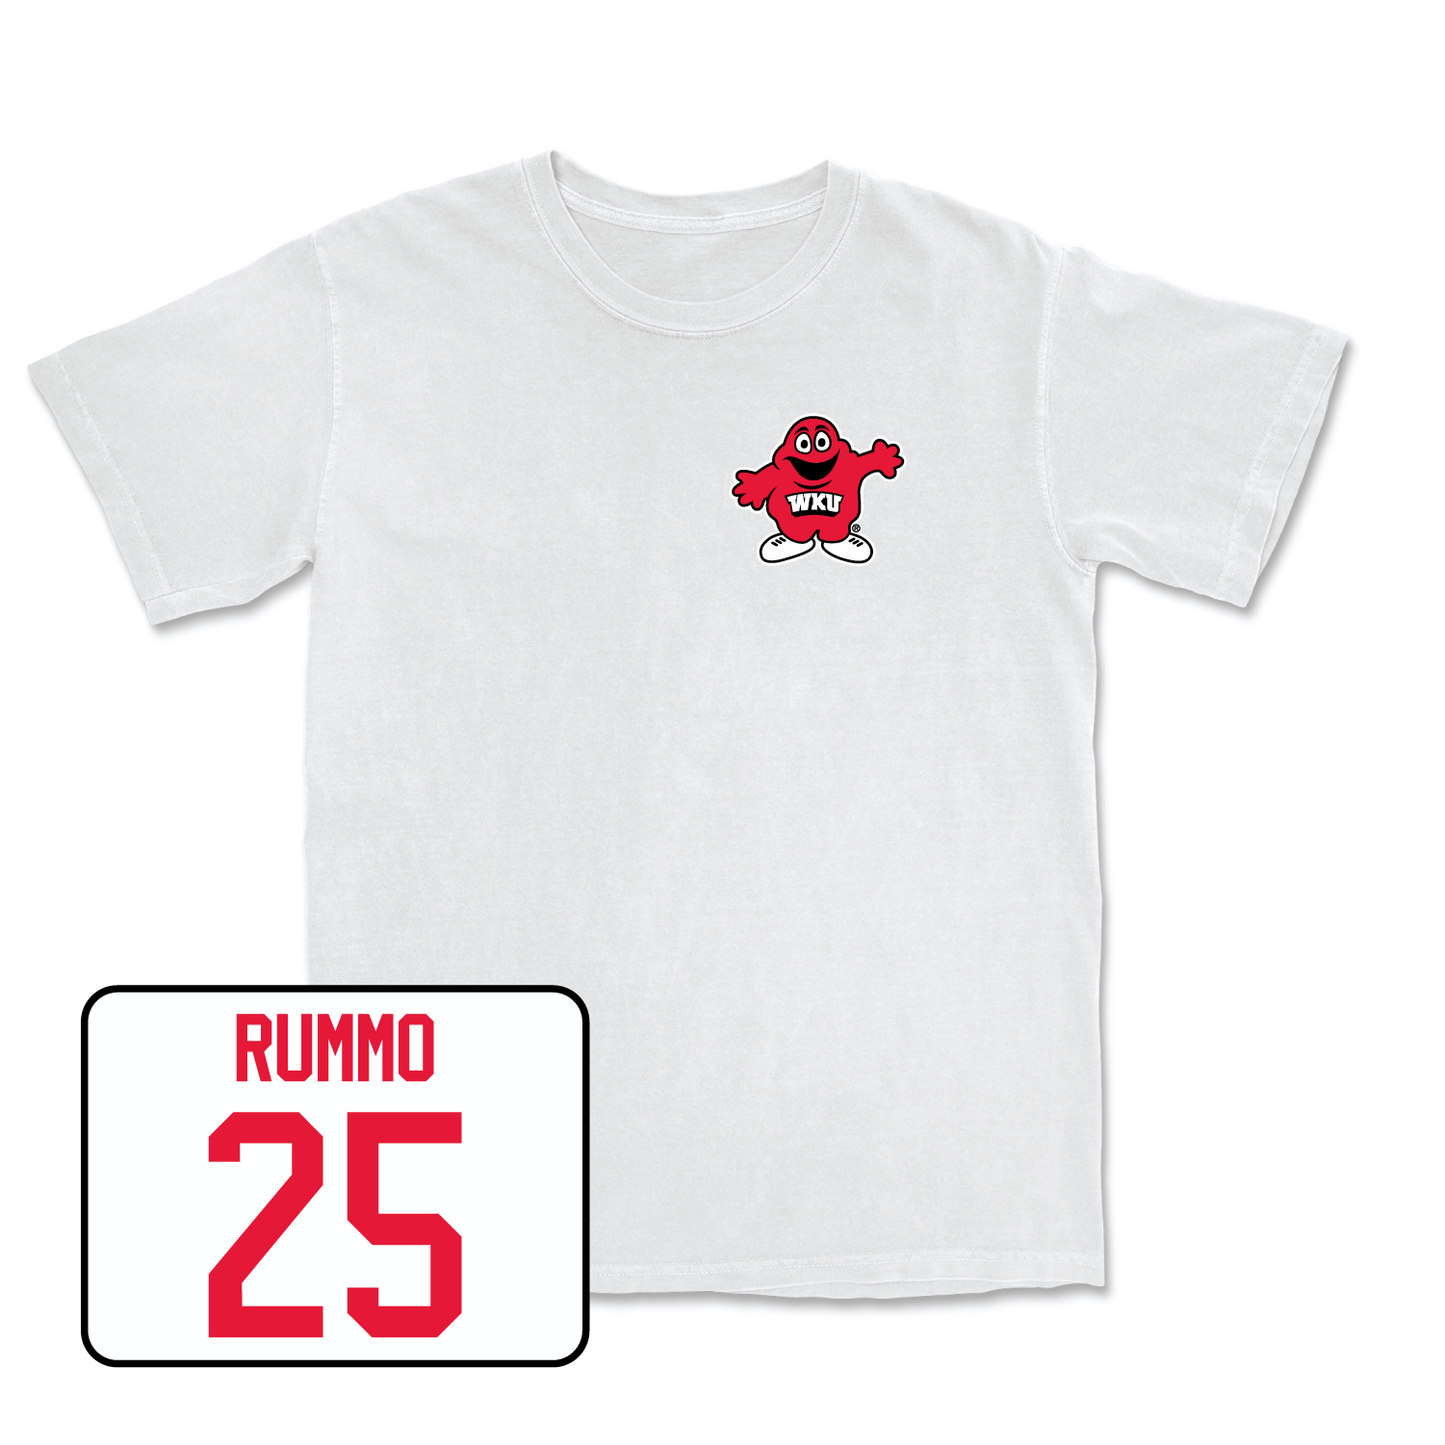 White Women's Soccer Big Red Comfort Colors Tee 2 4X-Large / Lily Rummo | #25